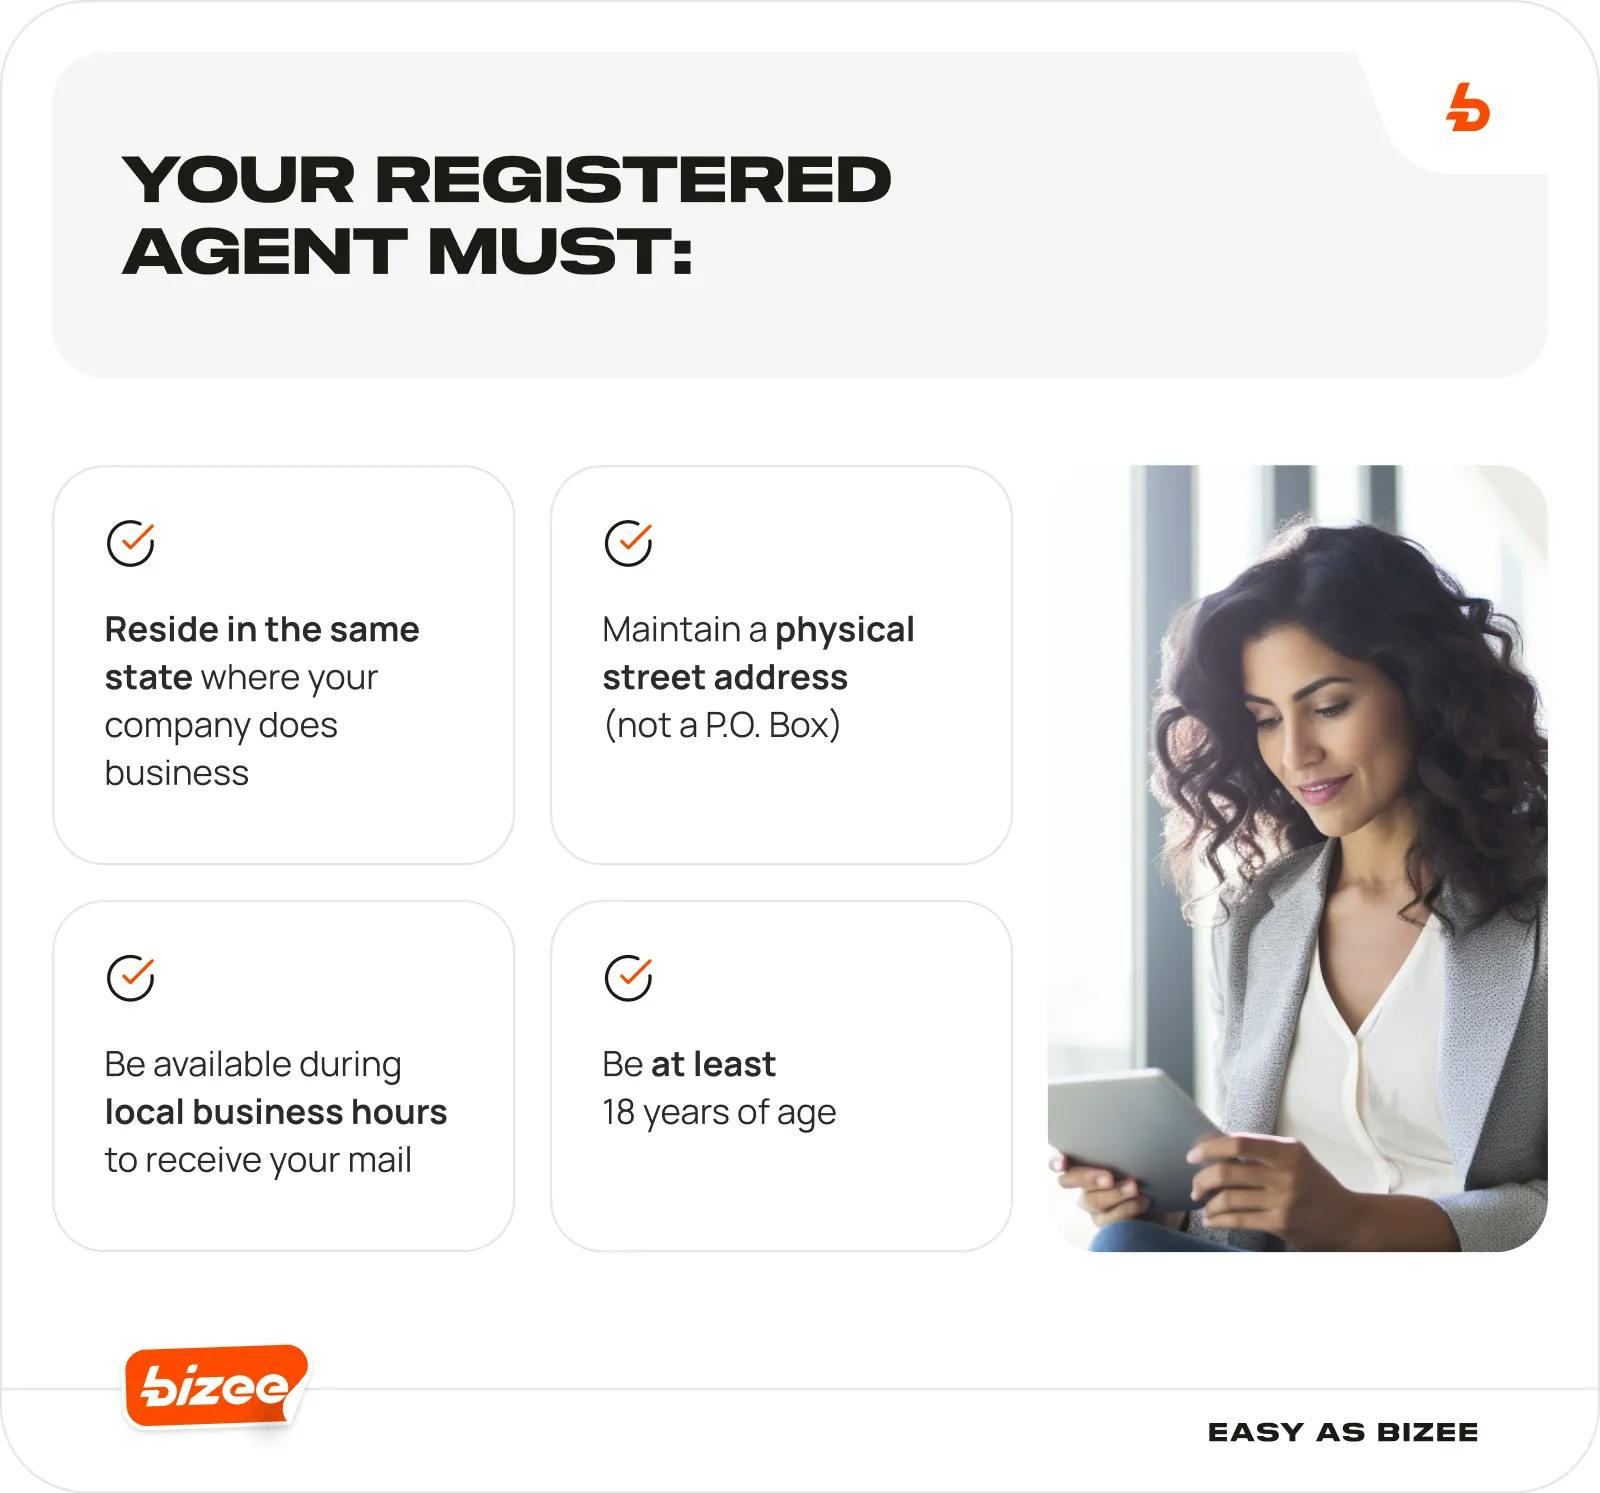 Your Registered Agent must